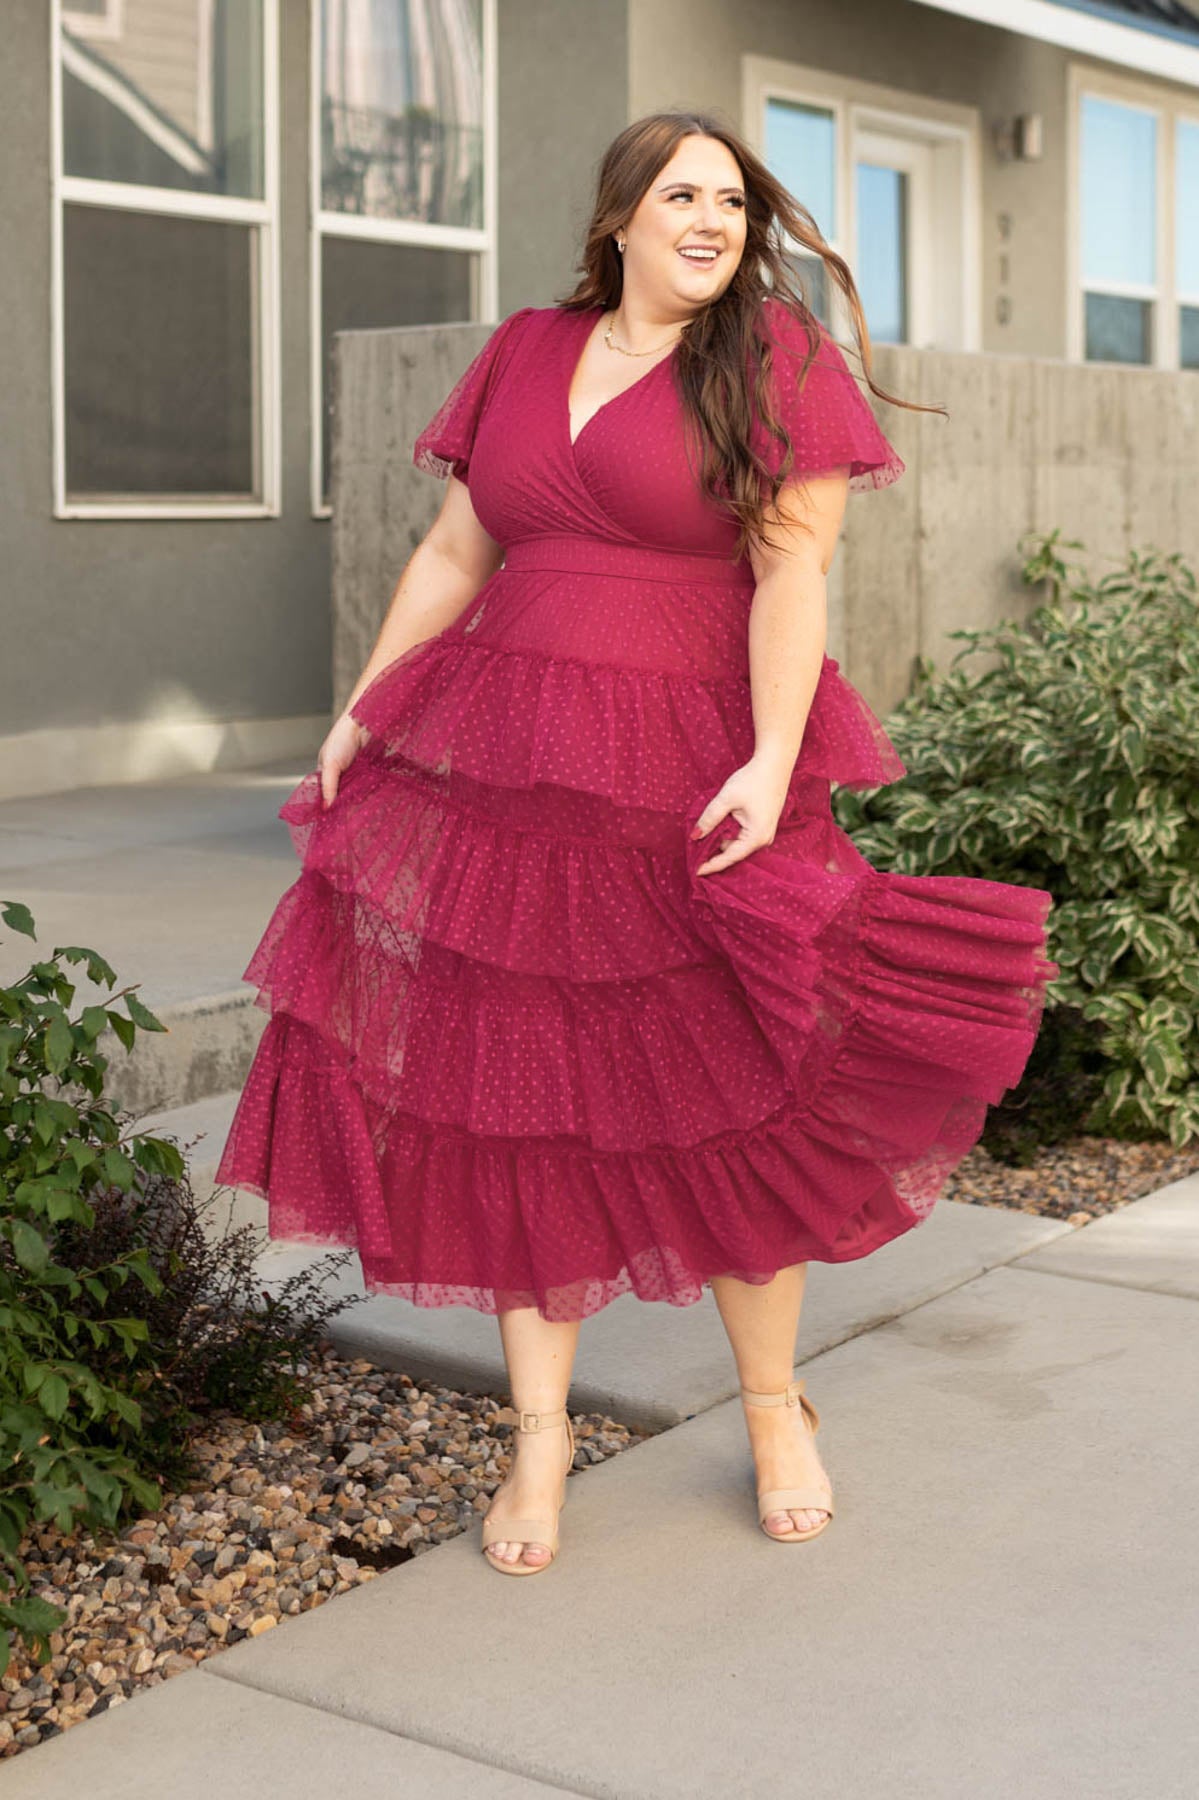 Plus size magenta dress with a ruffle skirt and polka dot pattern on the tulle 